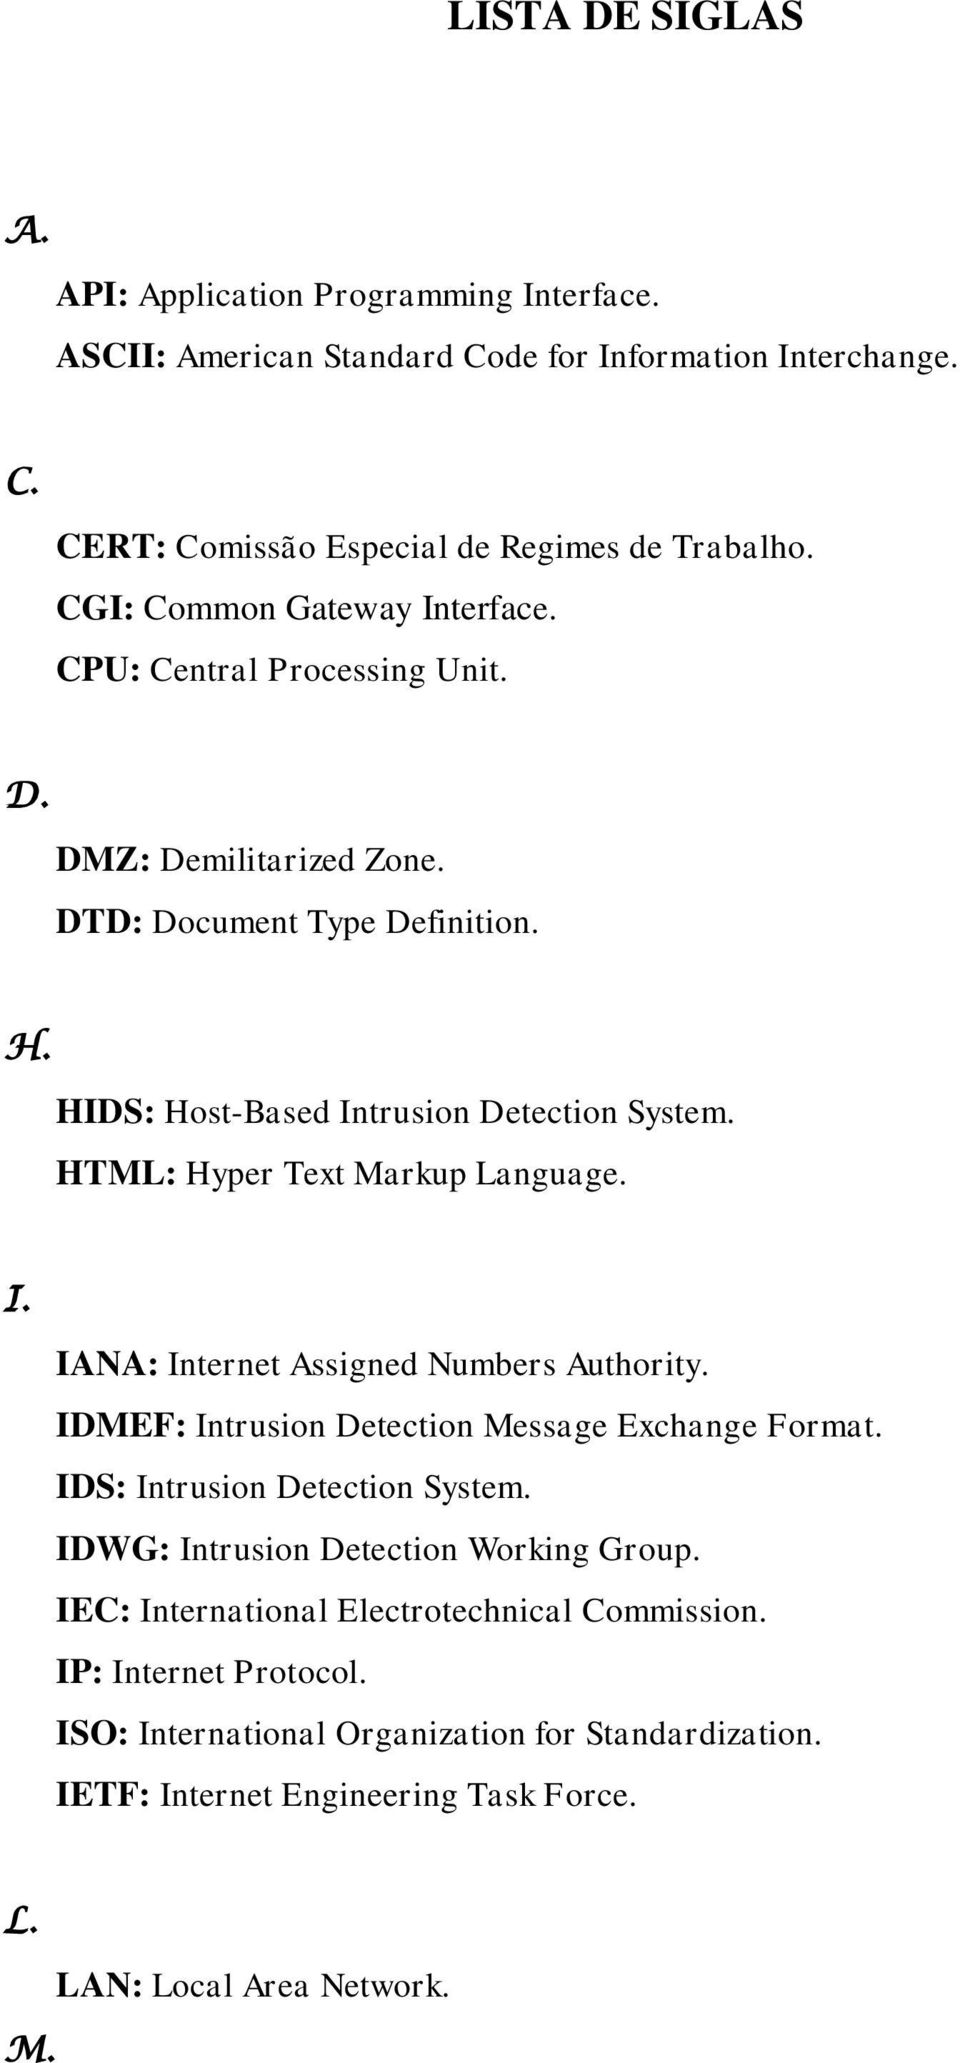 HTML: Hyper Text Markup Language. I. IANA: Internet Assigned Numbers Authority. IDMEF: Intrusion Detection Message Exchange Format. IDS: Intrusion Detection System.